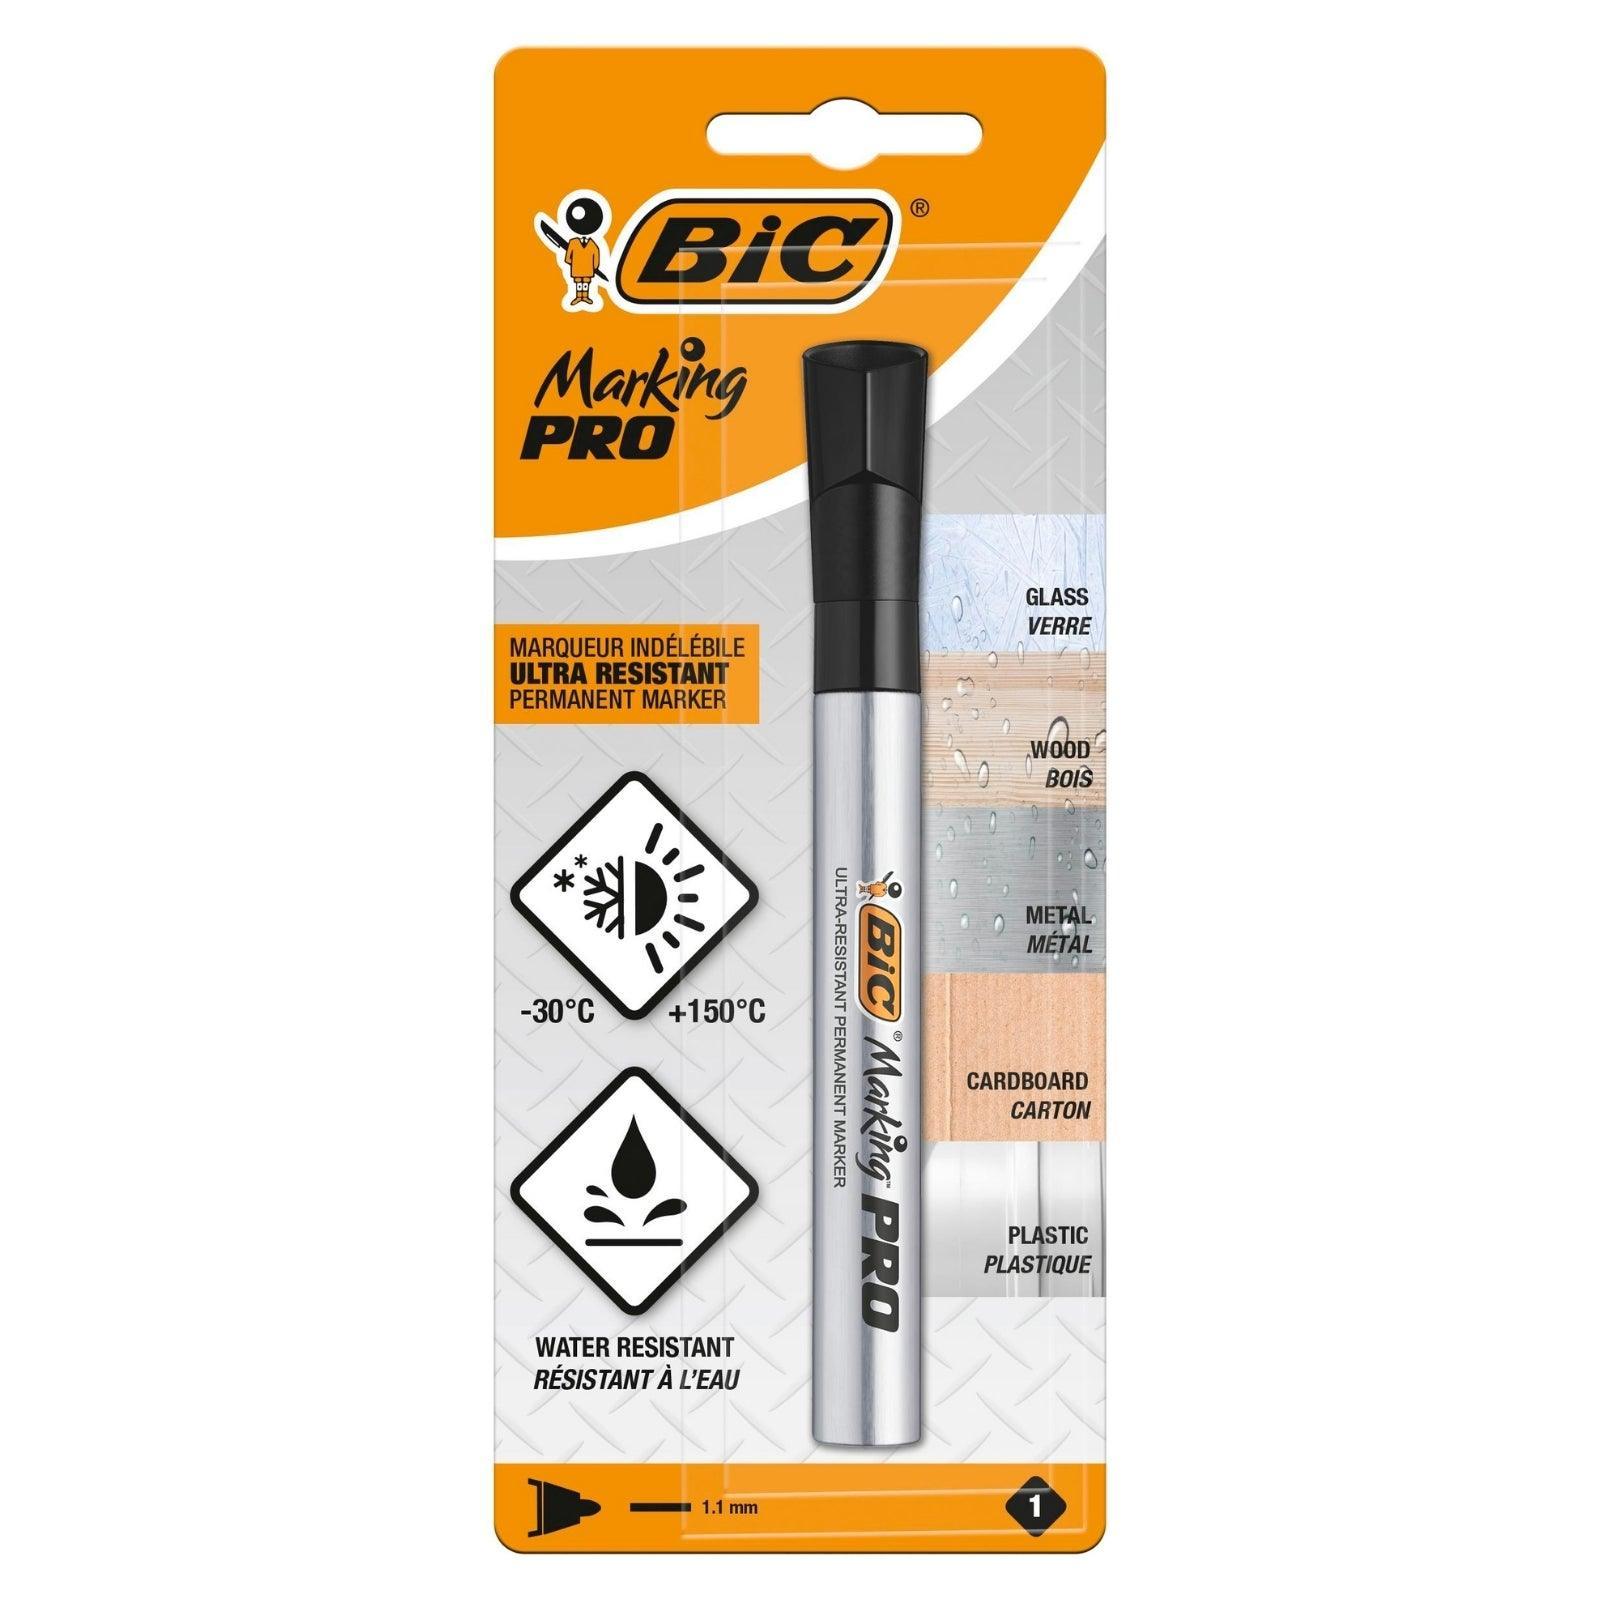 Bic Marking Pro Black Permanent Marker | WaTer Resistant - Choice Stores